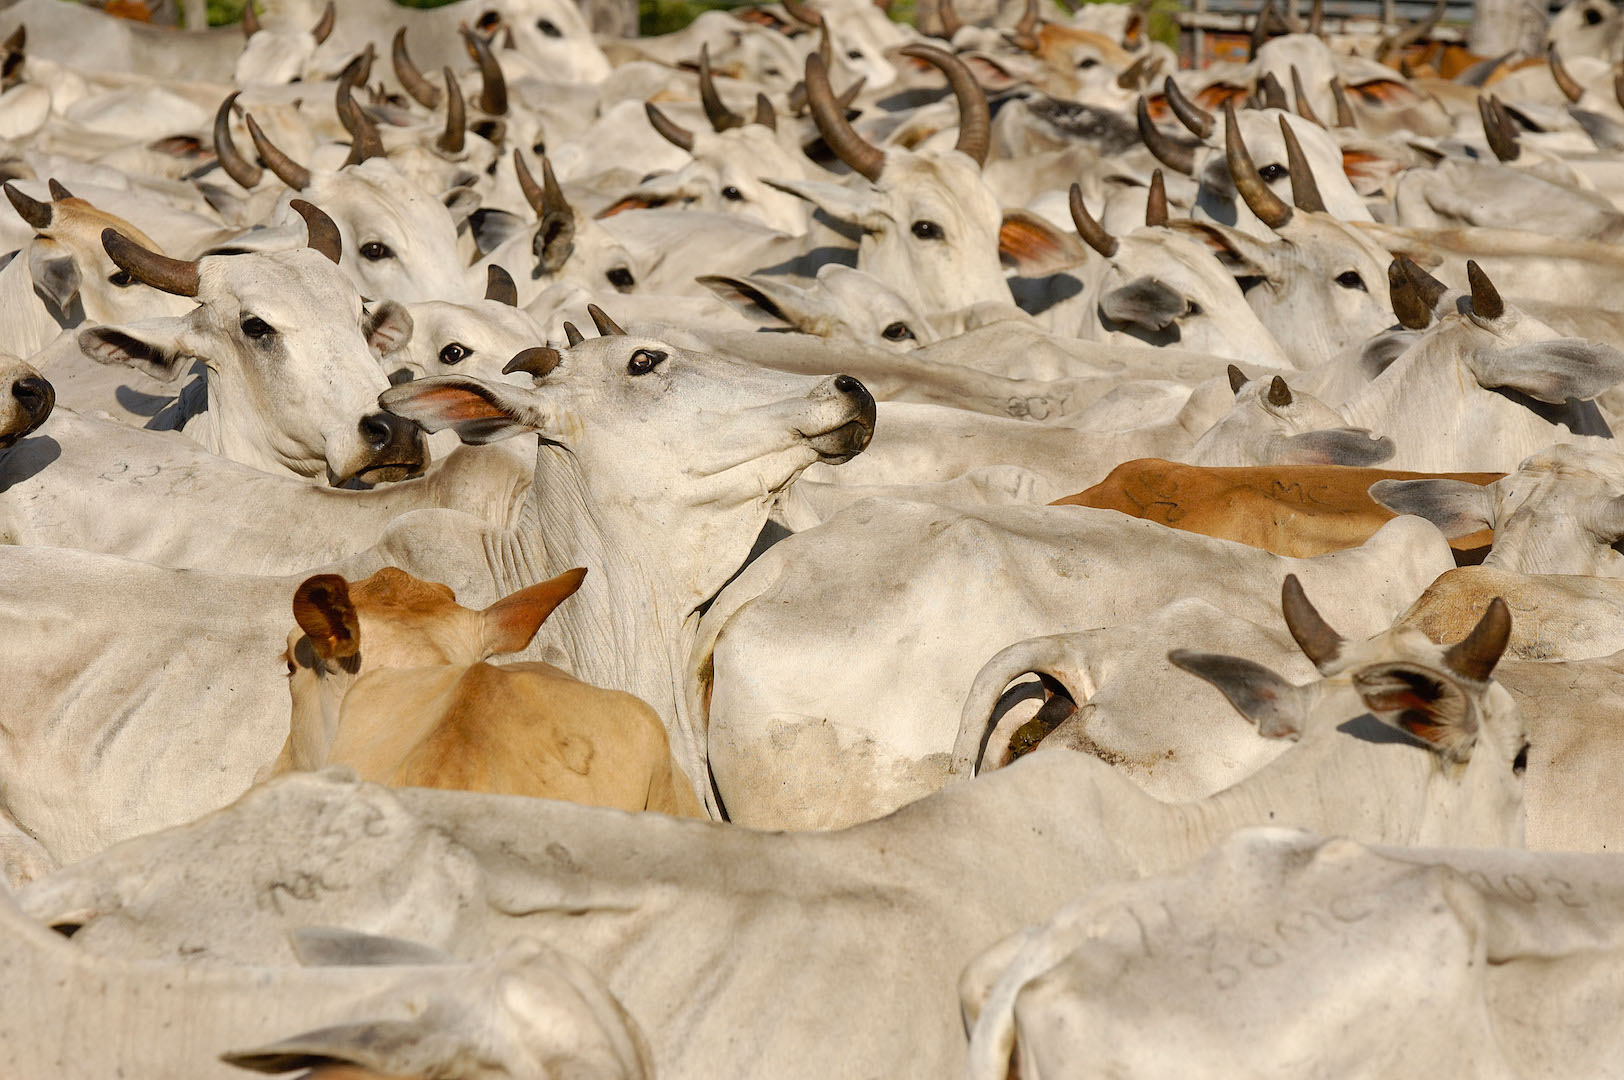 Pantanal cattle being herded, Mato Grosso do Sul Province, Brazil.